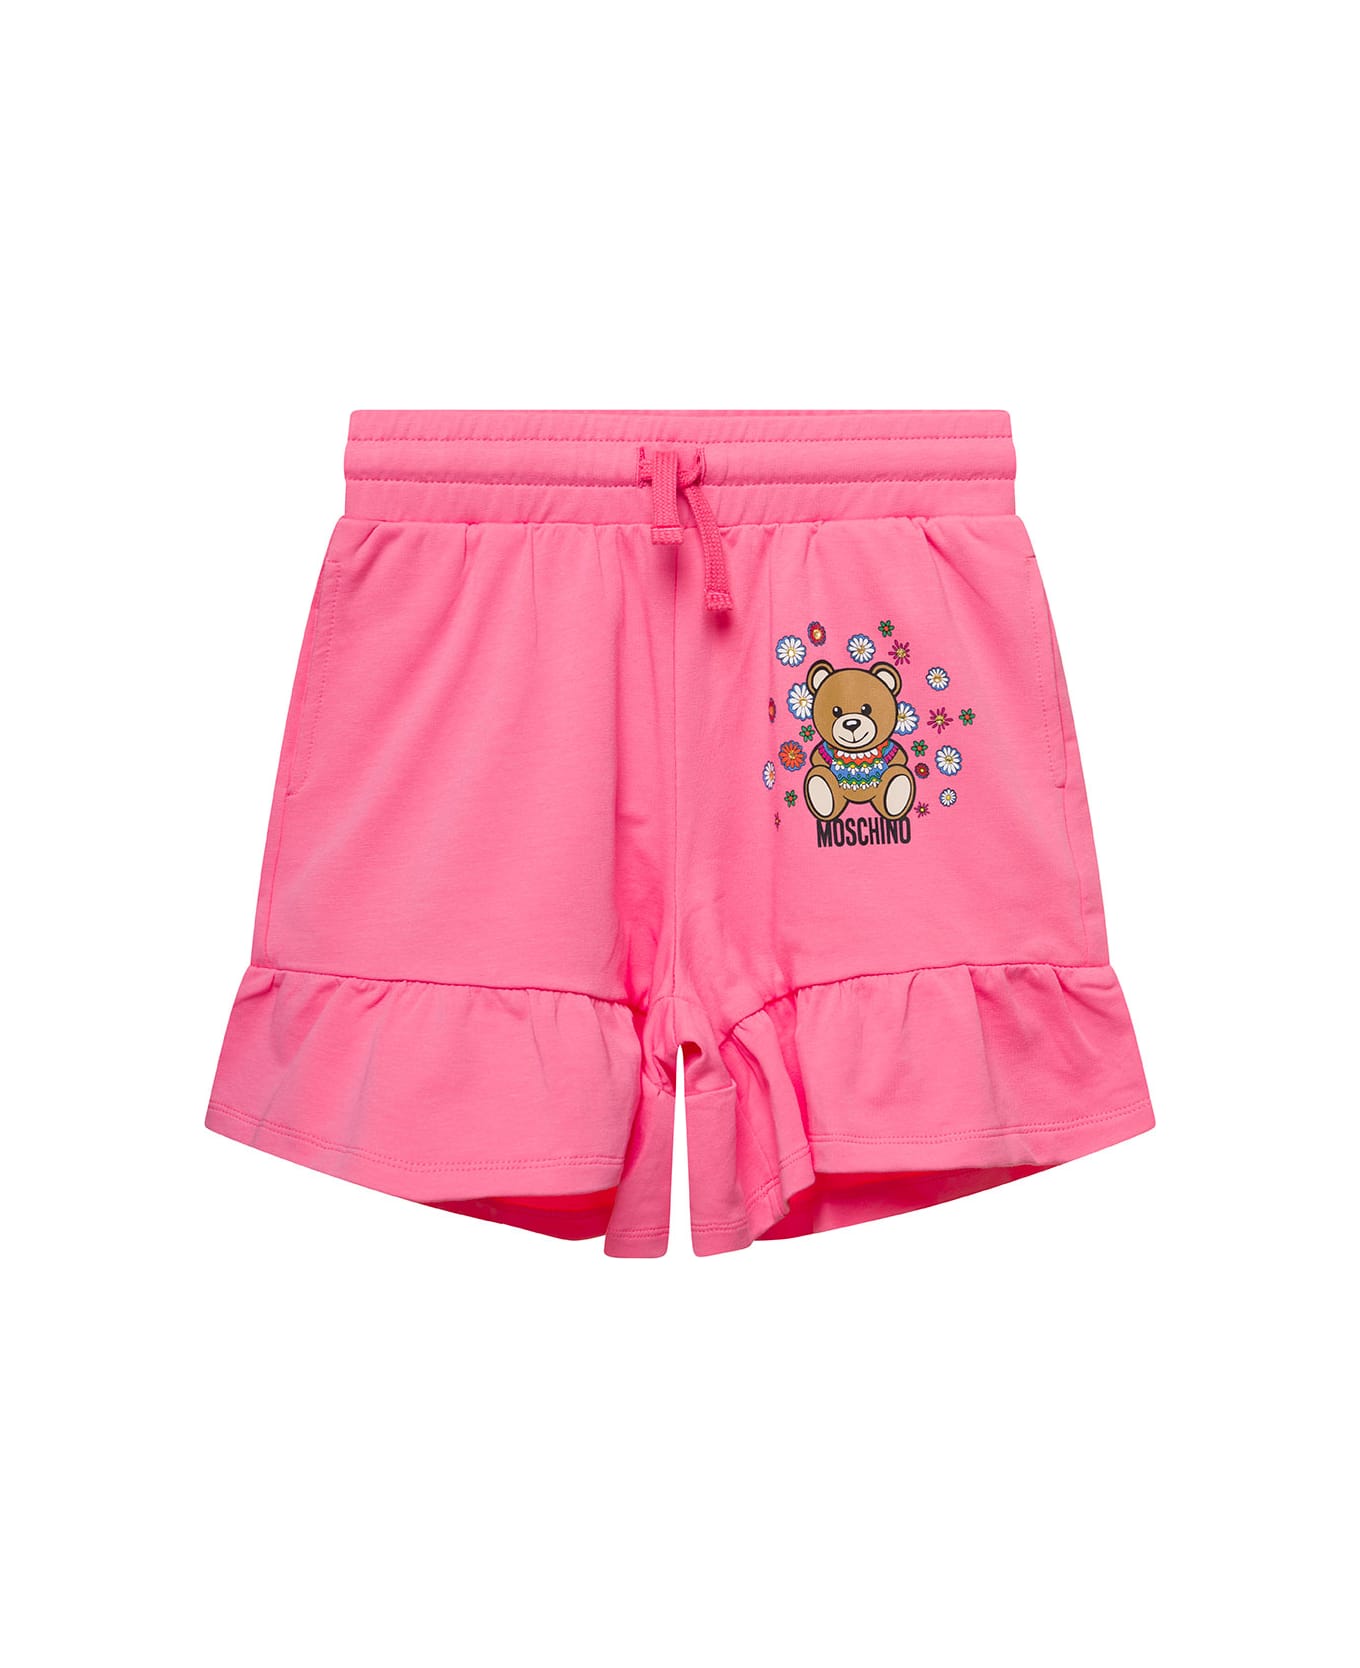 Moschino Pink Shorts With Teddy Bear Print And Frill Trim In Stretch Cotton Girl - Pink ボトムス